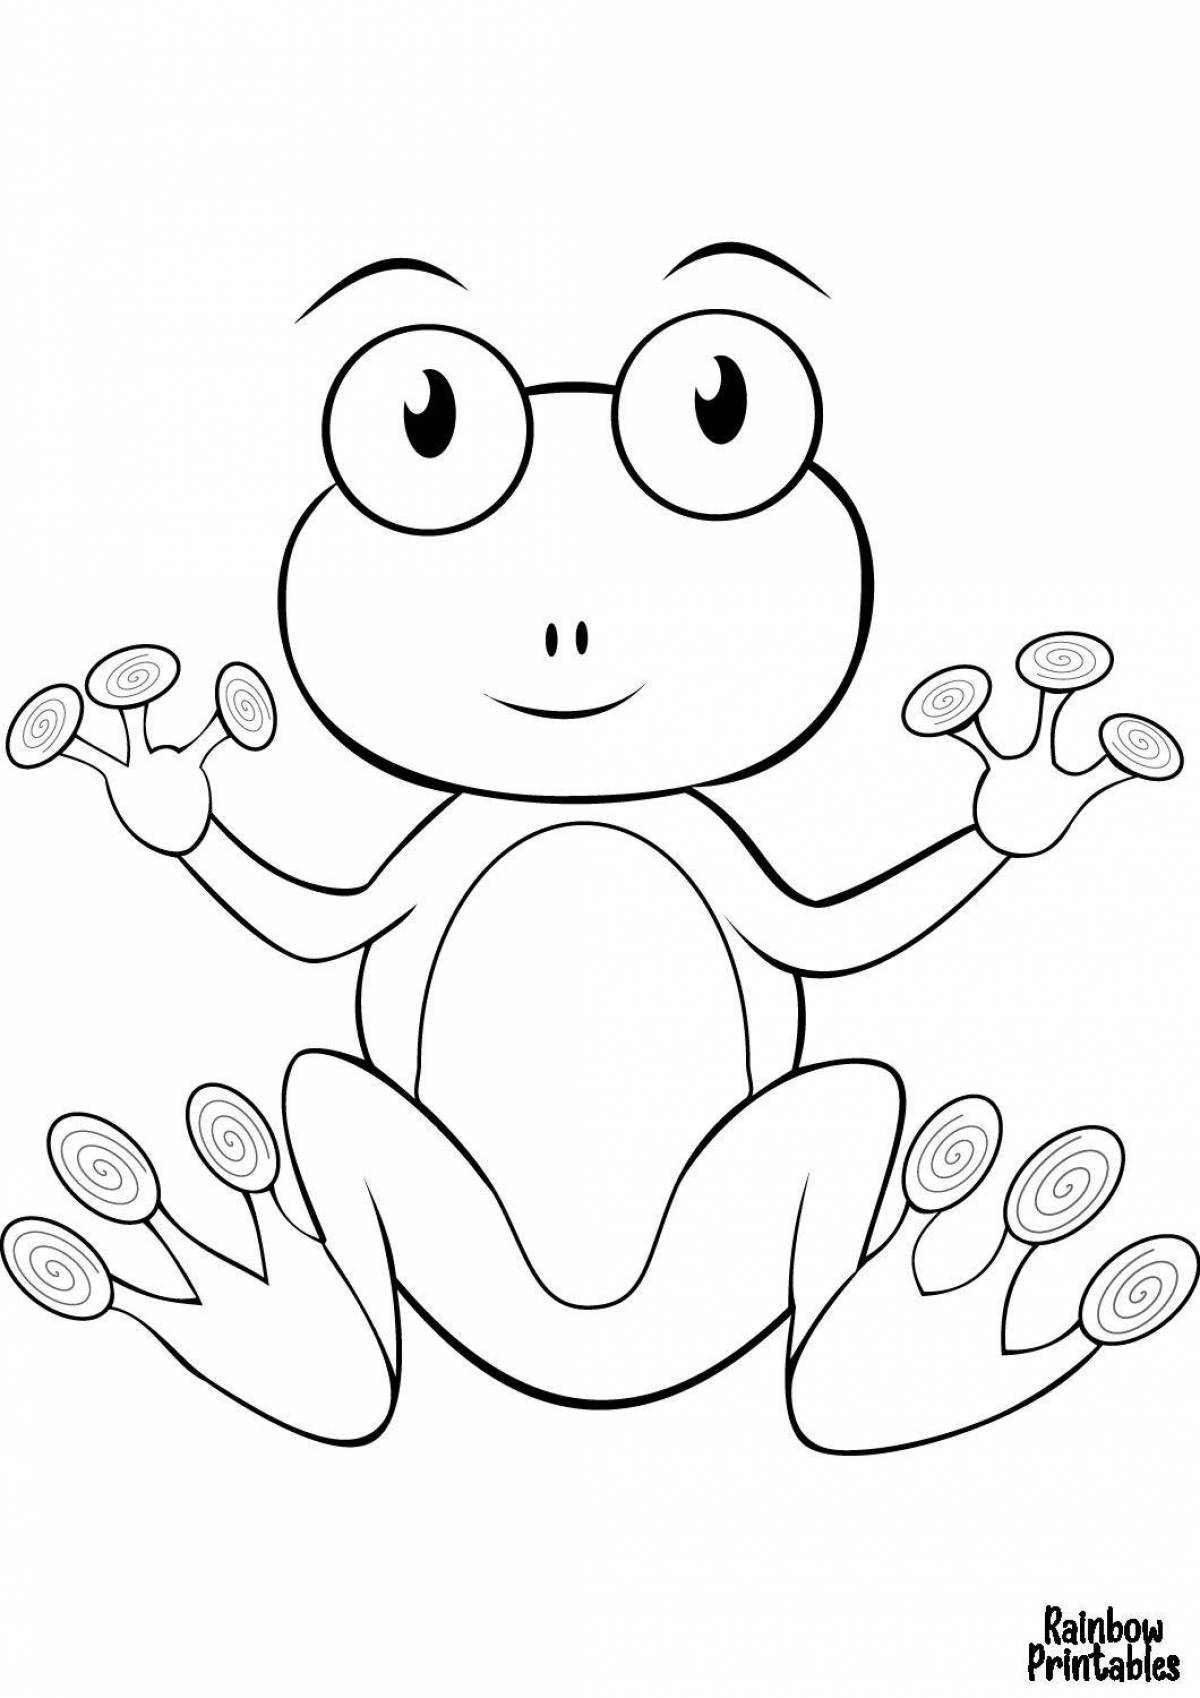 Playful frog coloring book for 3-4 year olds